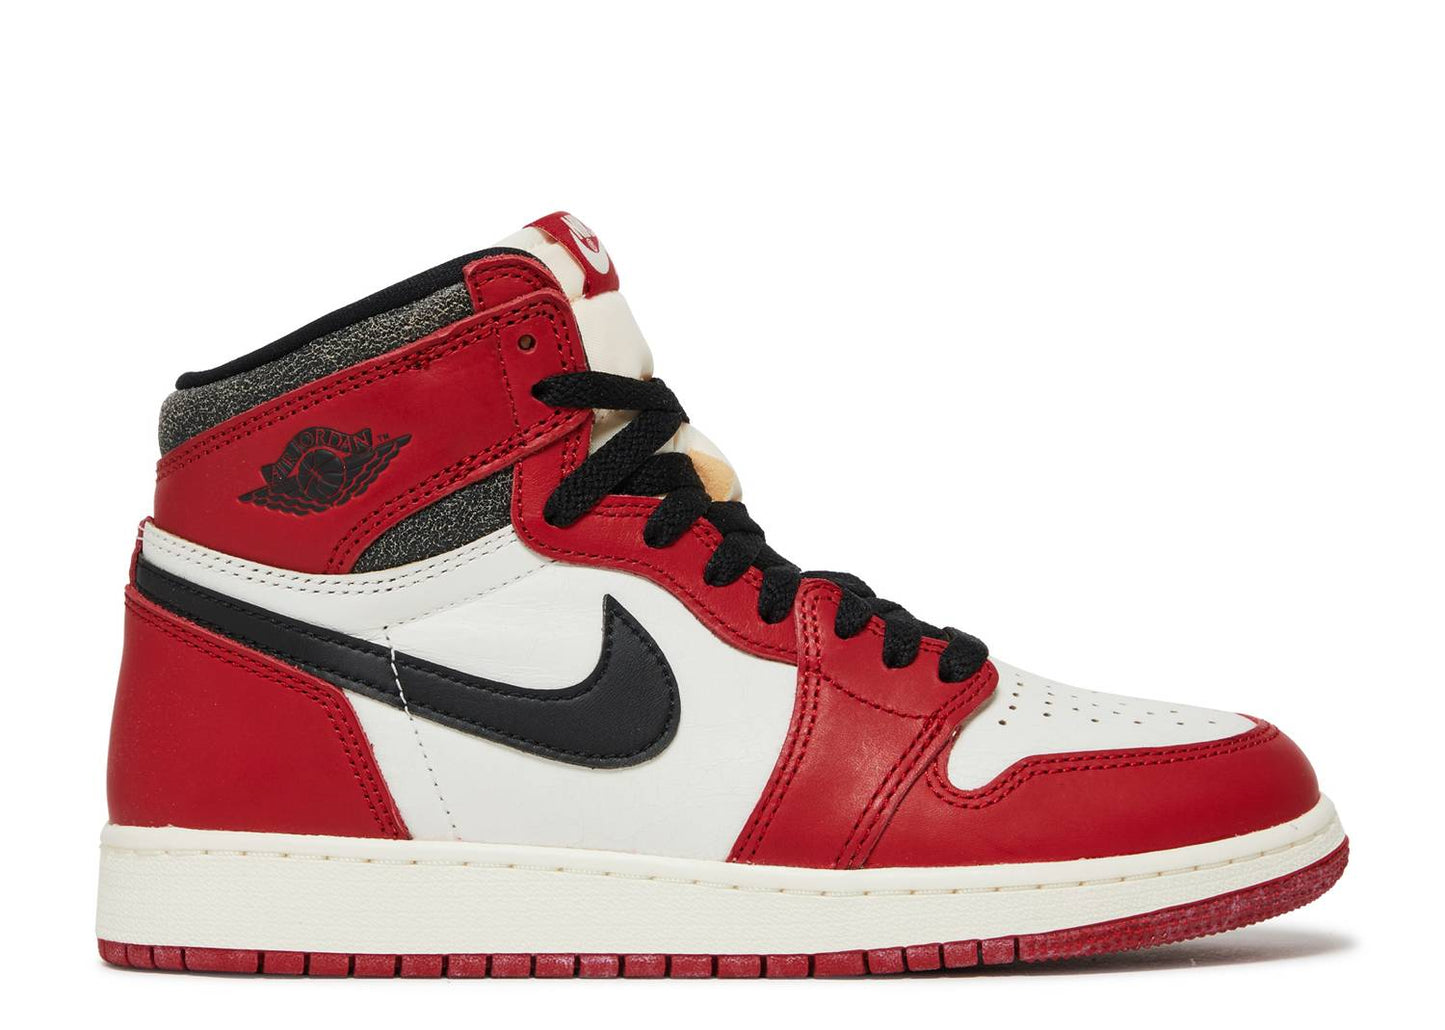 Jordan 1 Retro High OG Chicago Lost And Found (GS)